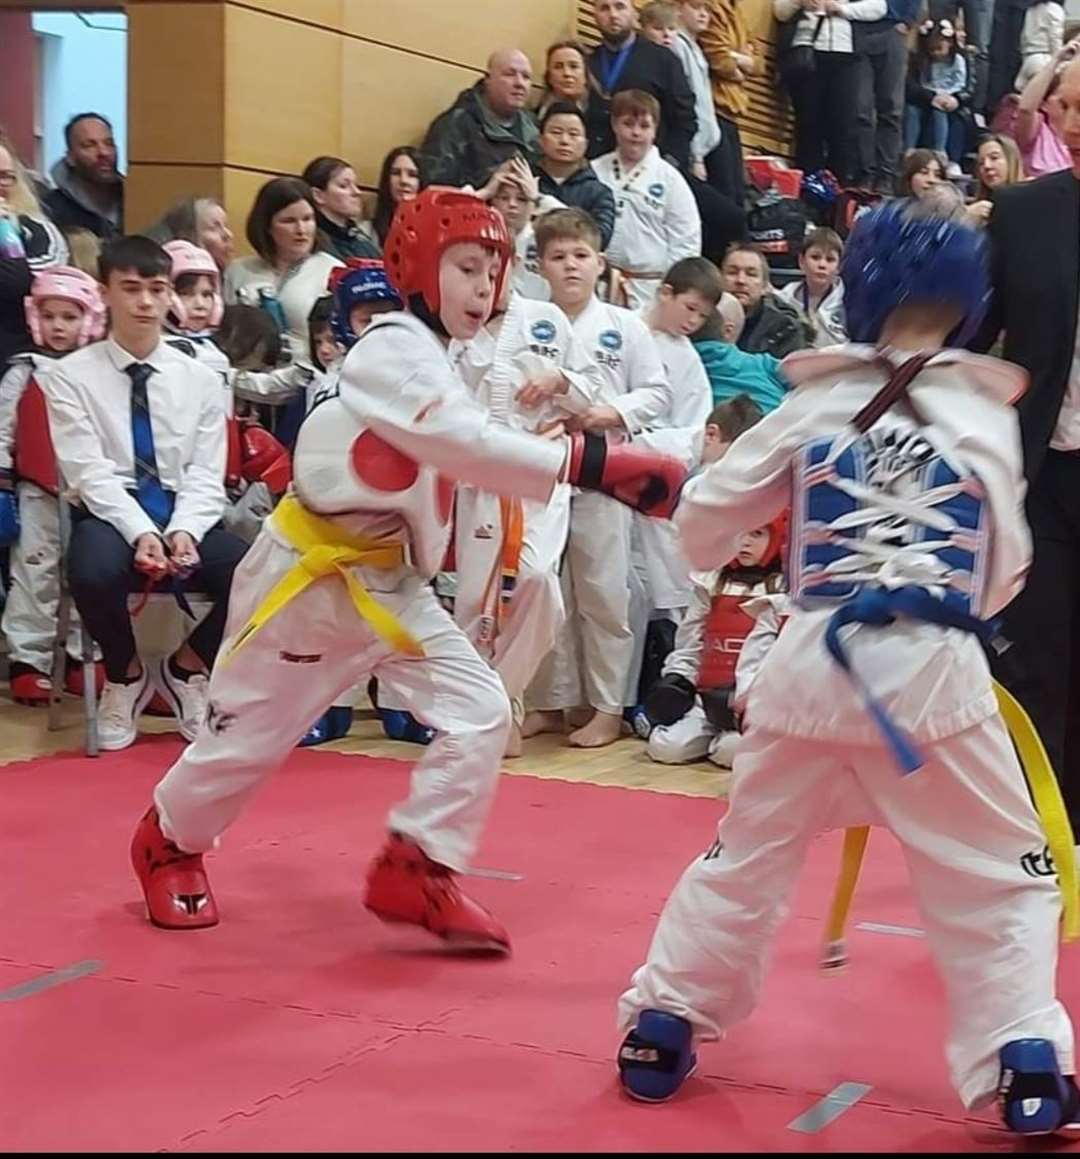 Scenes from the action at Saturday's competition in Nairn.